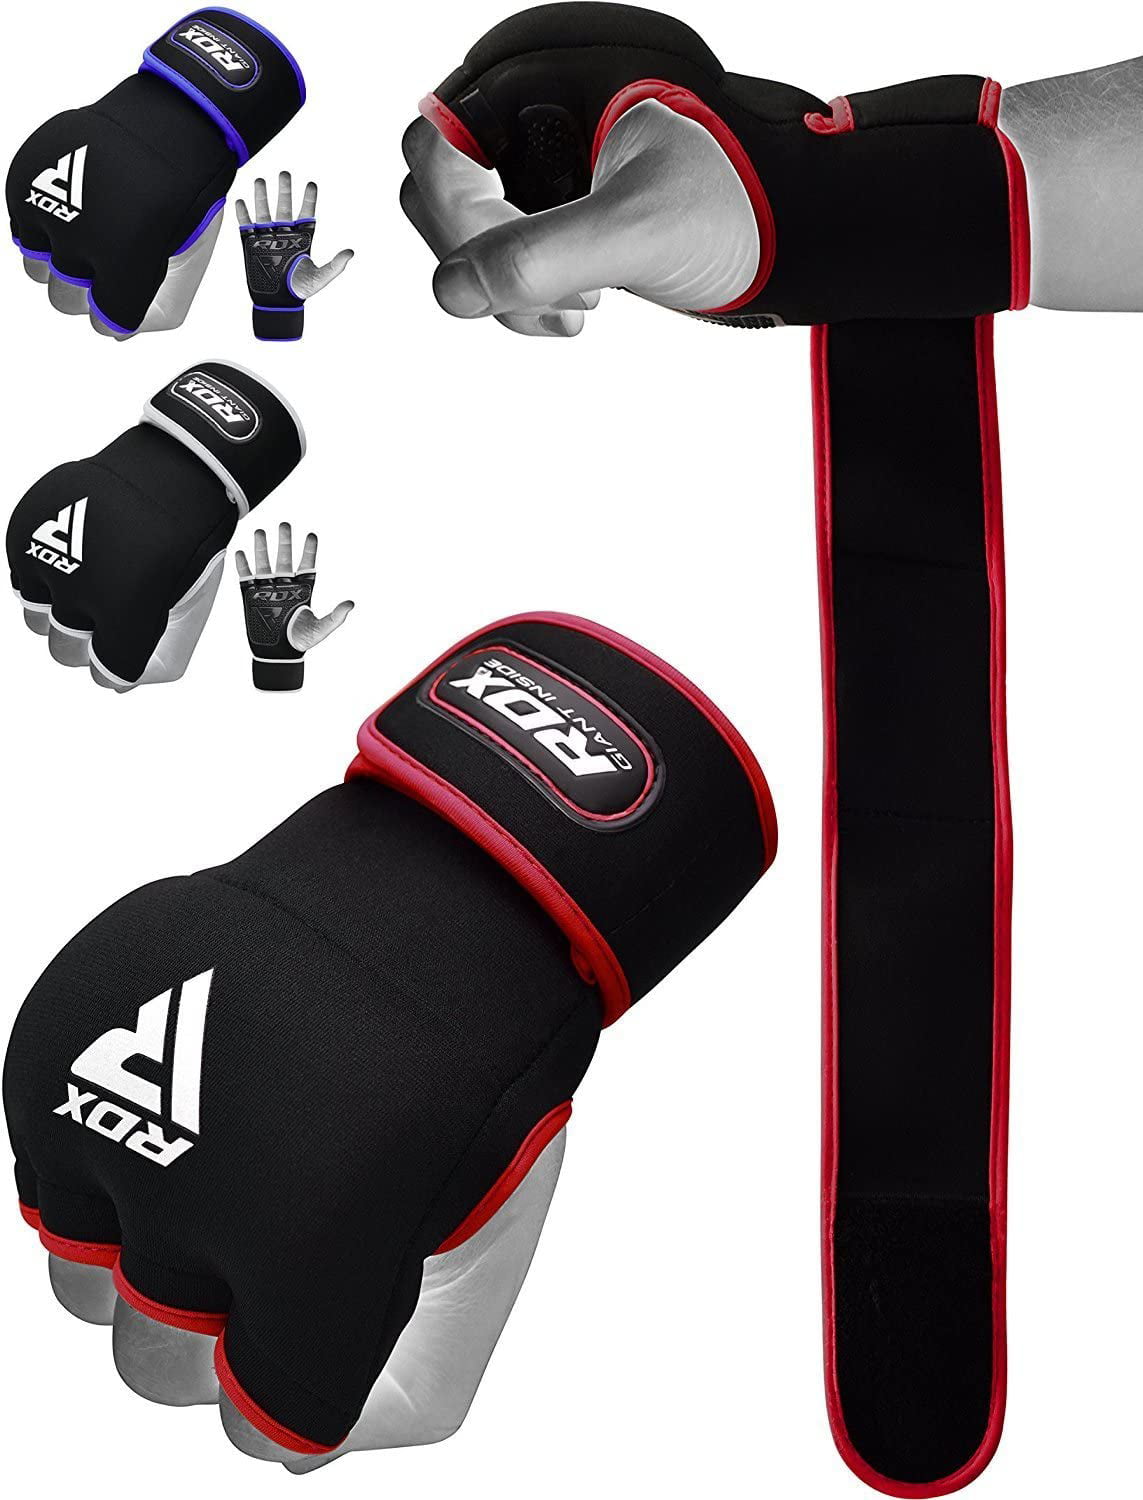 Hand Wraps Boxing Muay Thai Inner Gloves Punch Bag Training MMA Support Bandages 